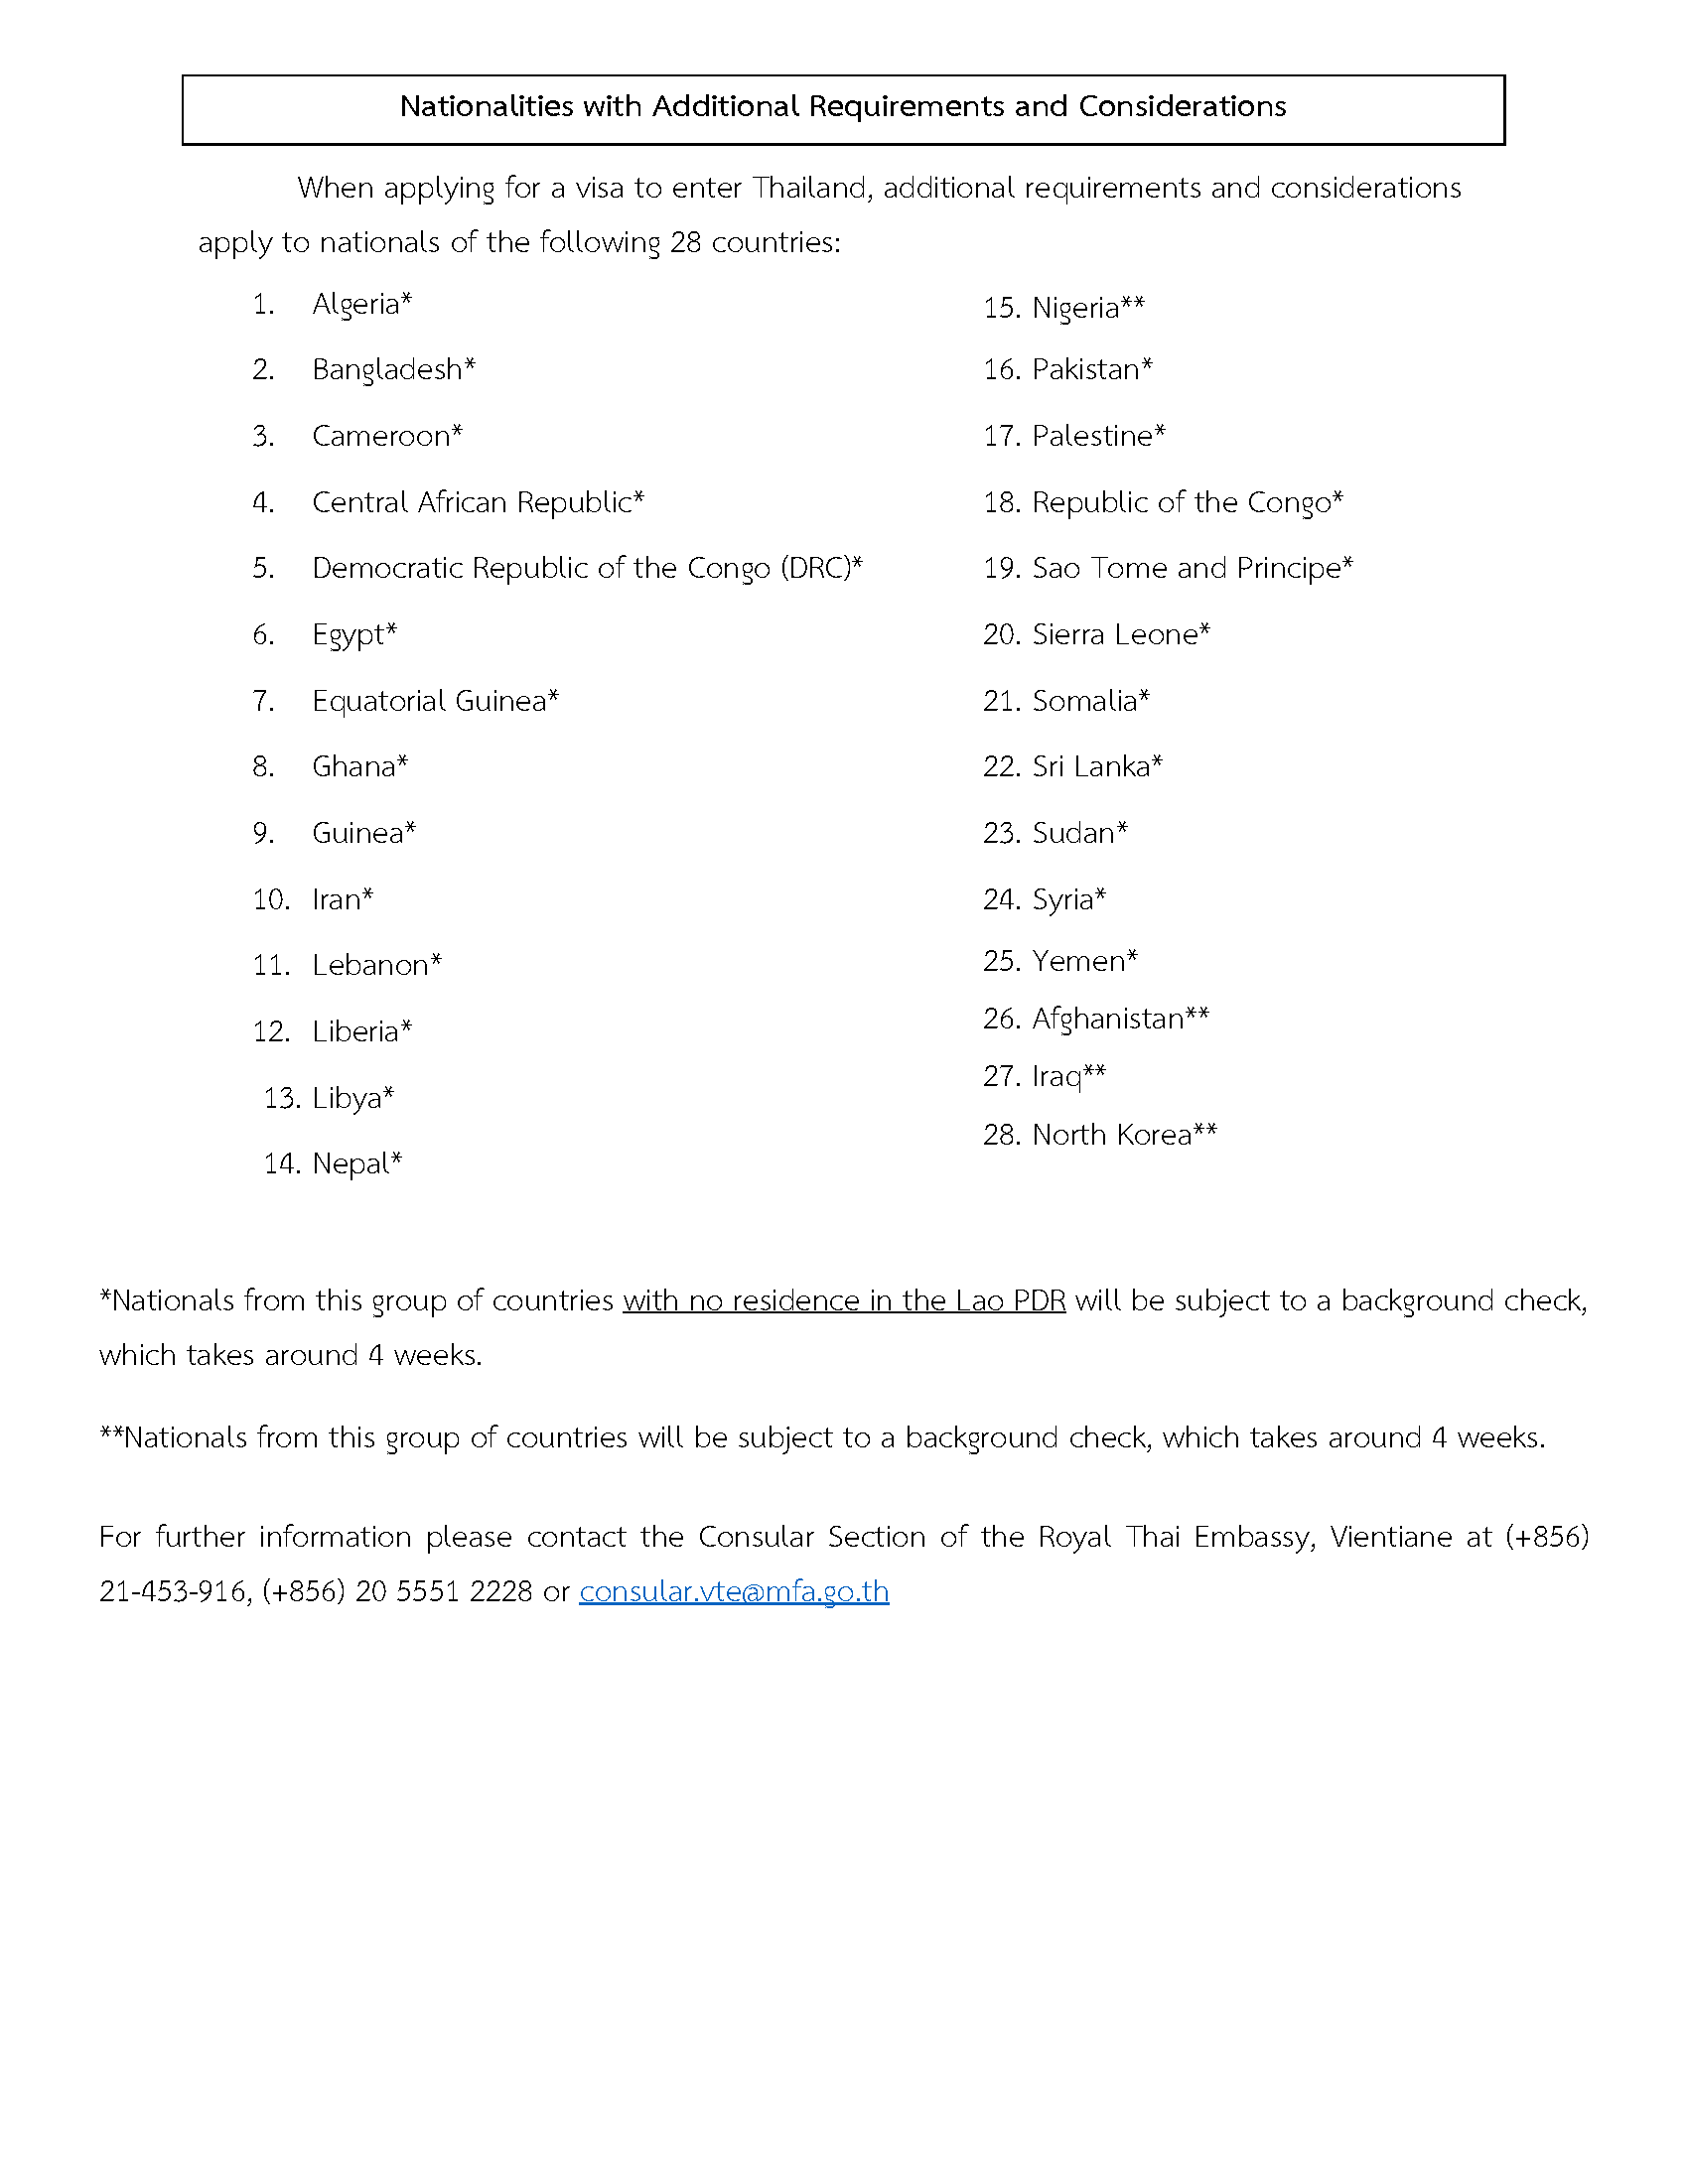 Nationalities_with_Additional_Requirements_and_Considerations_Page_1